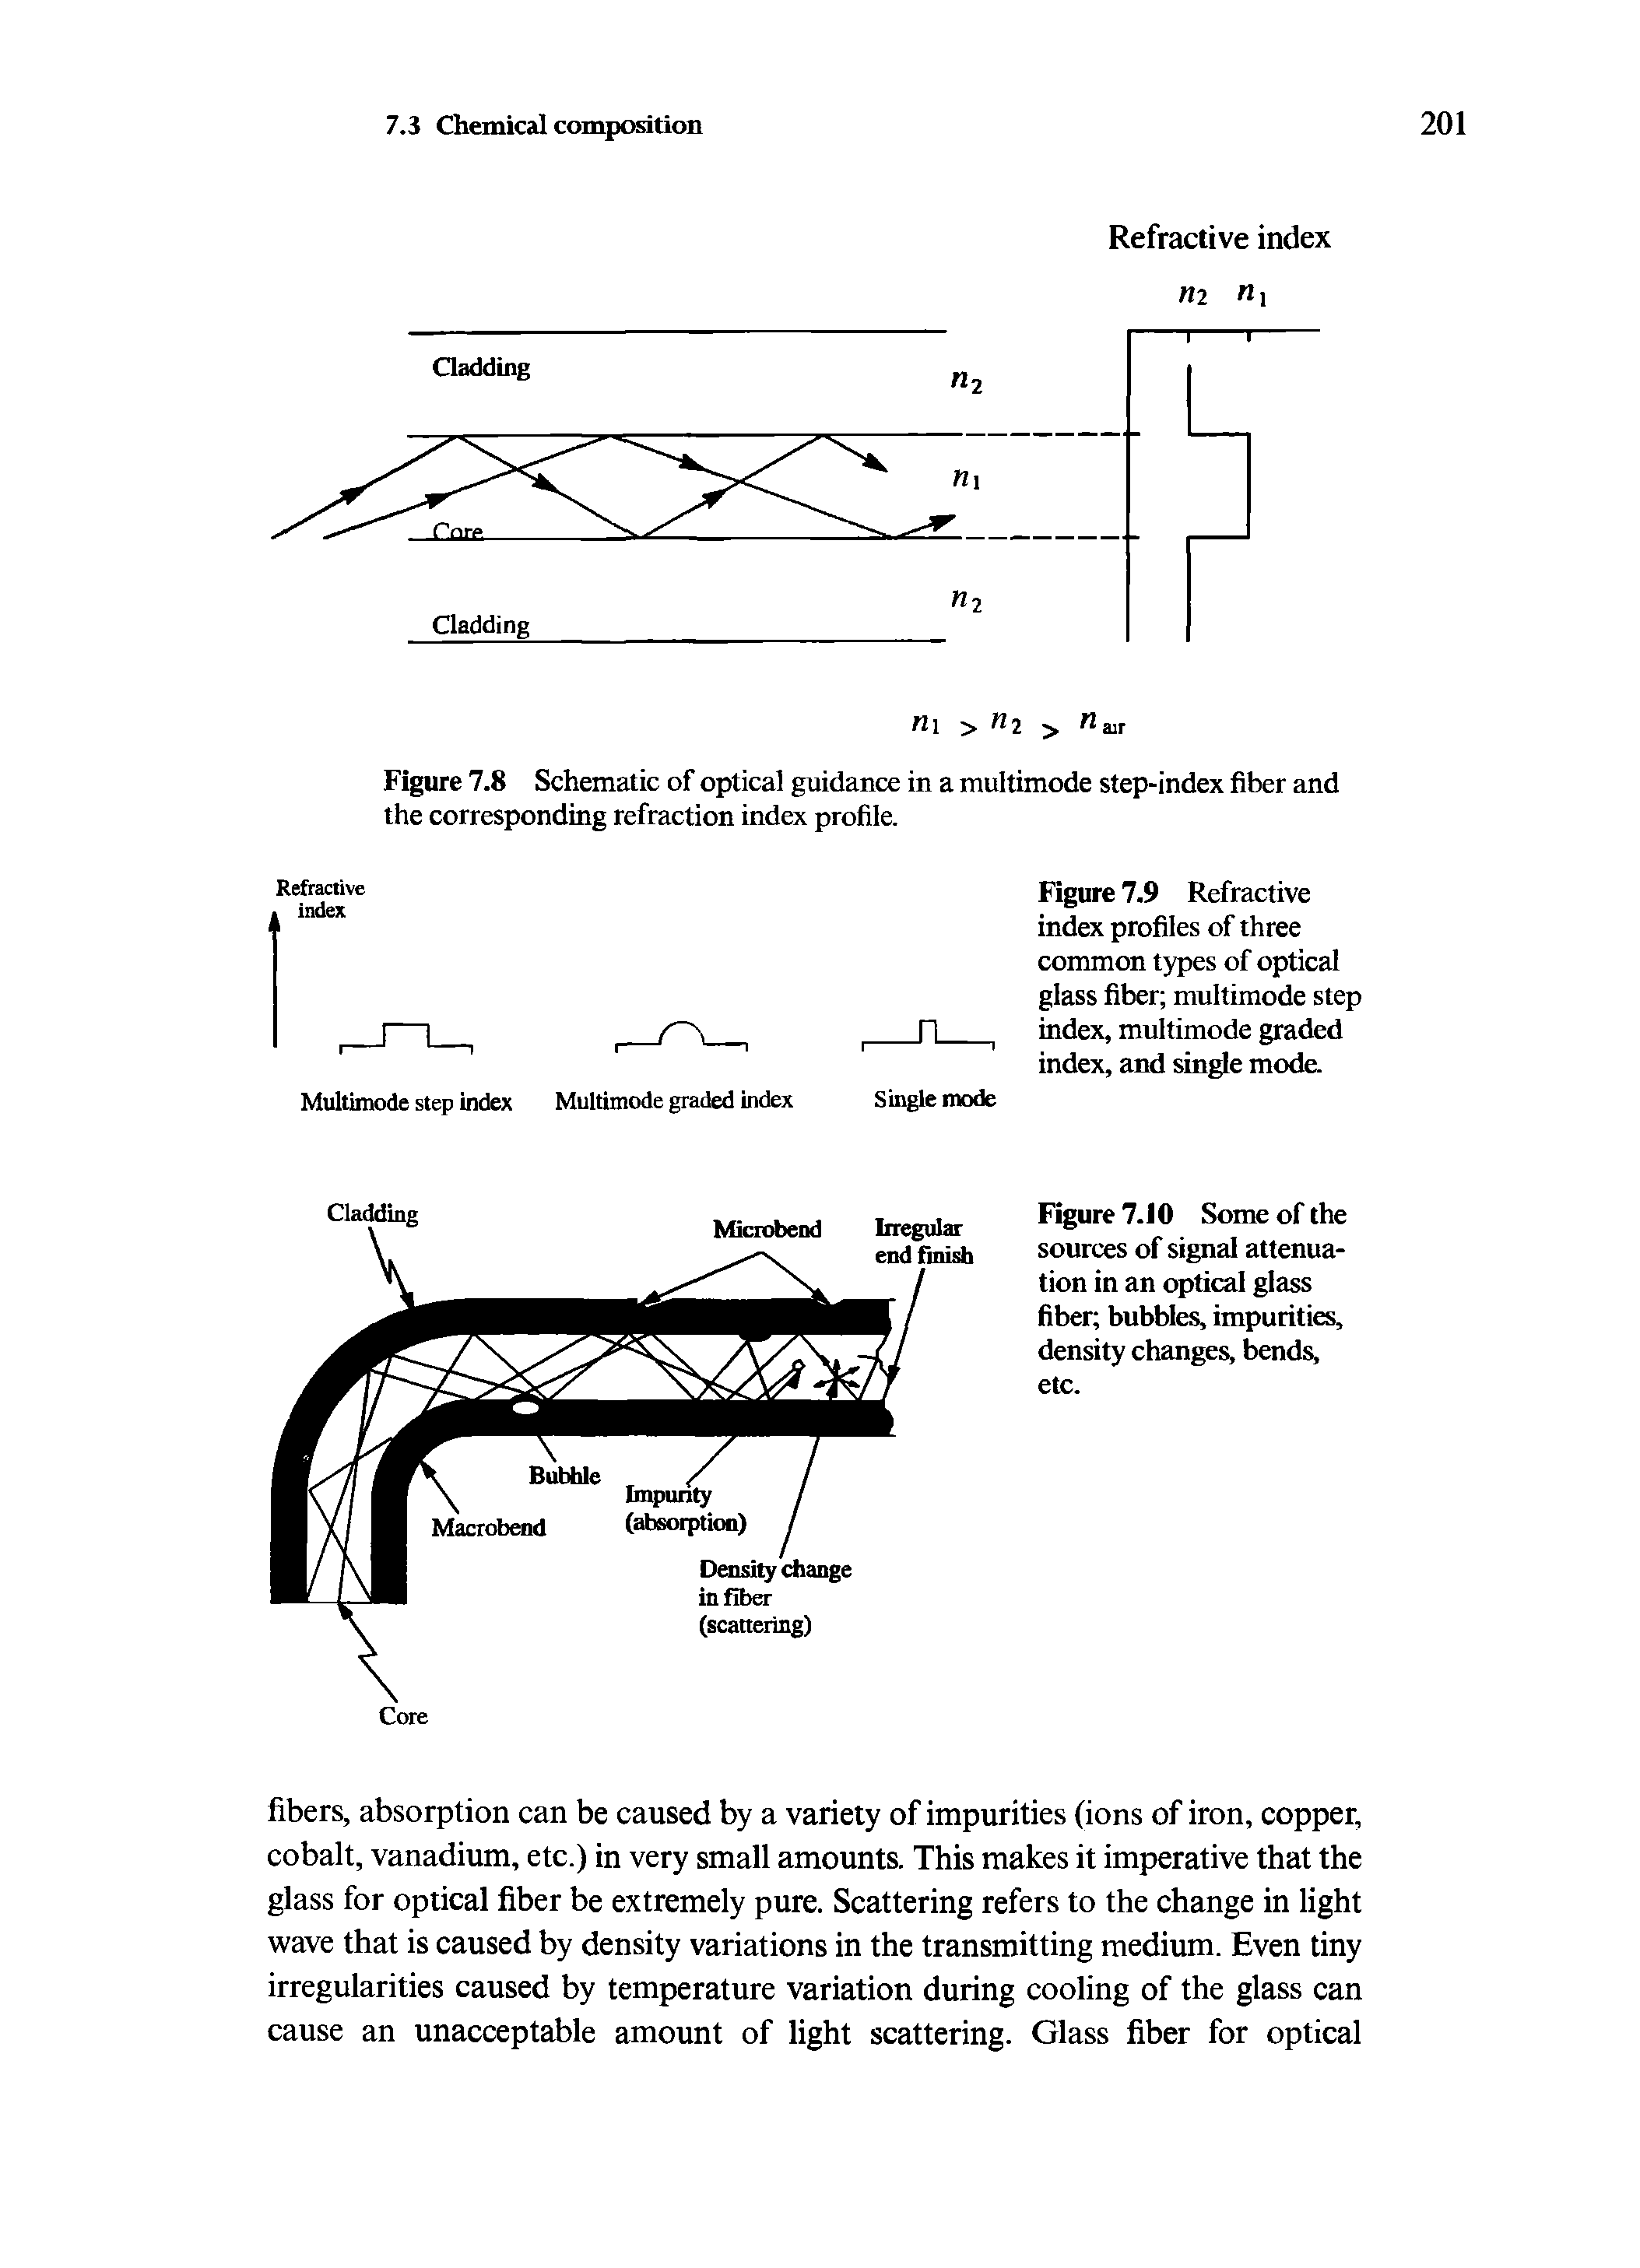 Figure 7.8 Schematic of optical guidance in a multimode step-index fiber and the corresponding refraction index profile.